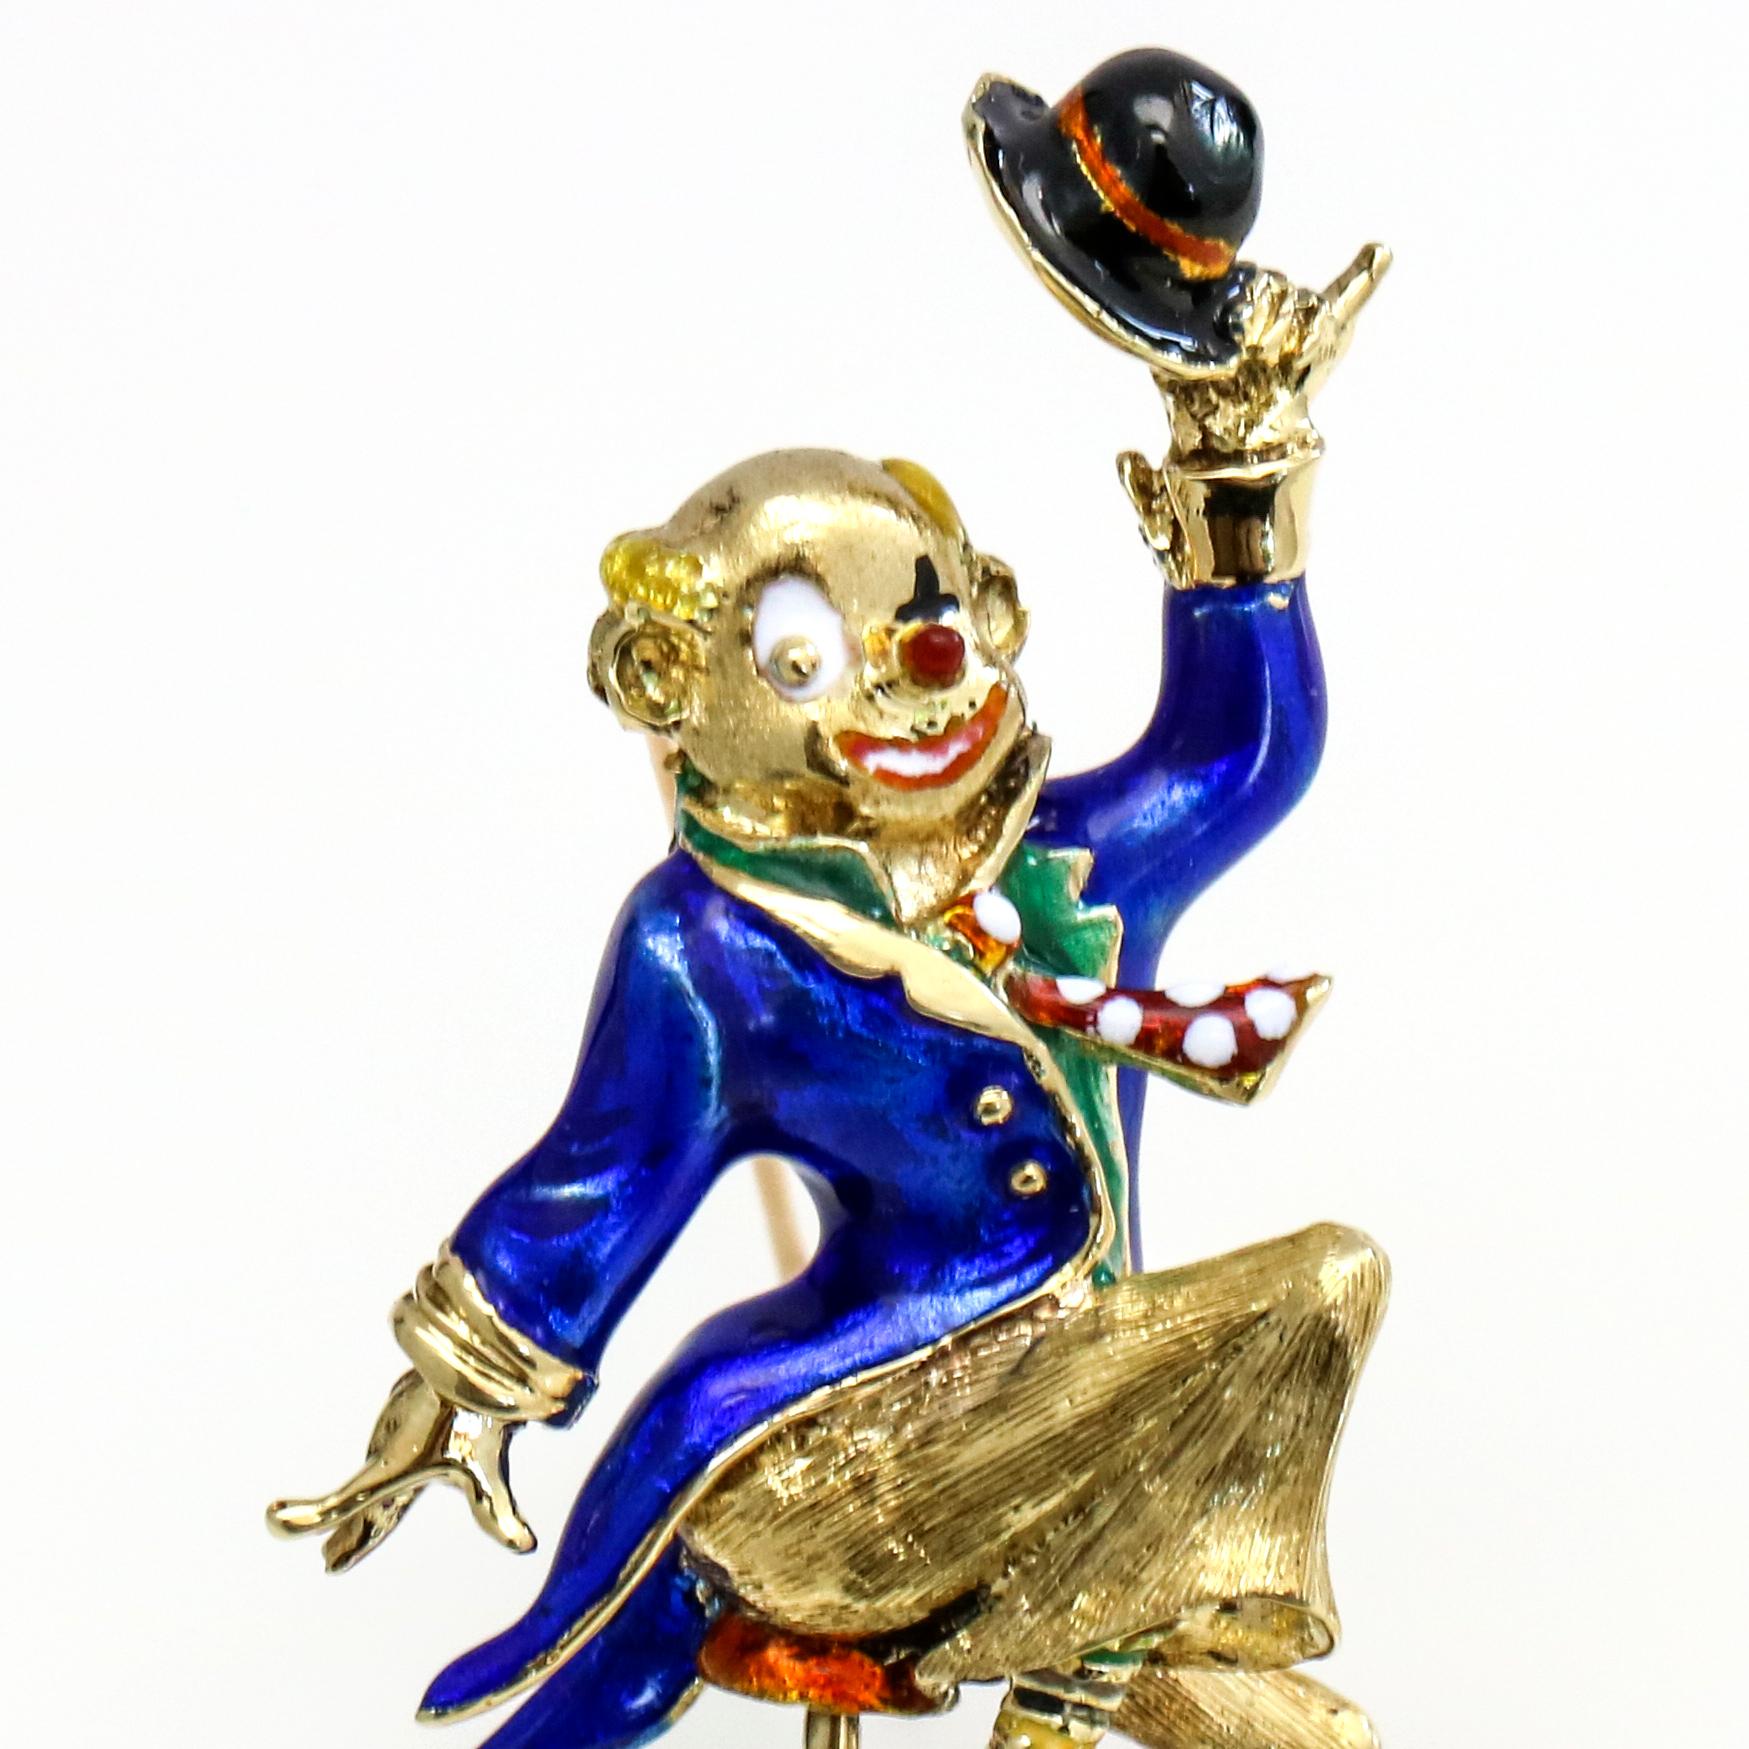 A clown riding a unicycle holding a hat brooch with enamel paint and textured metal details in 14-karat yellow gold. The wheel spins.